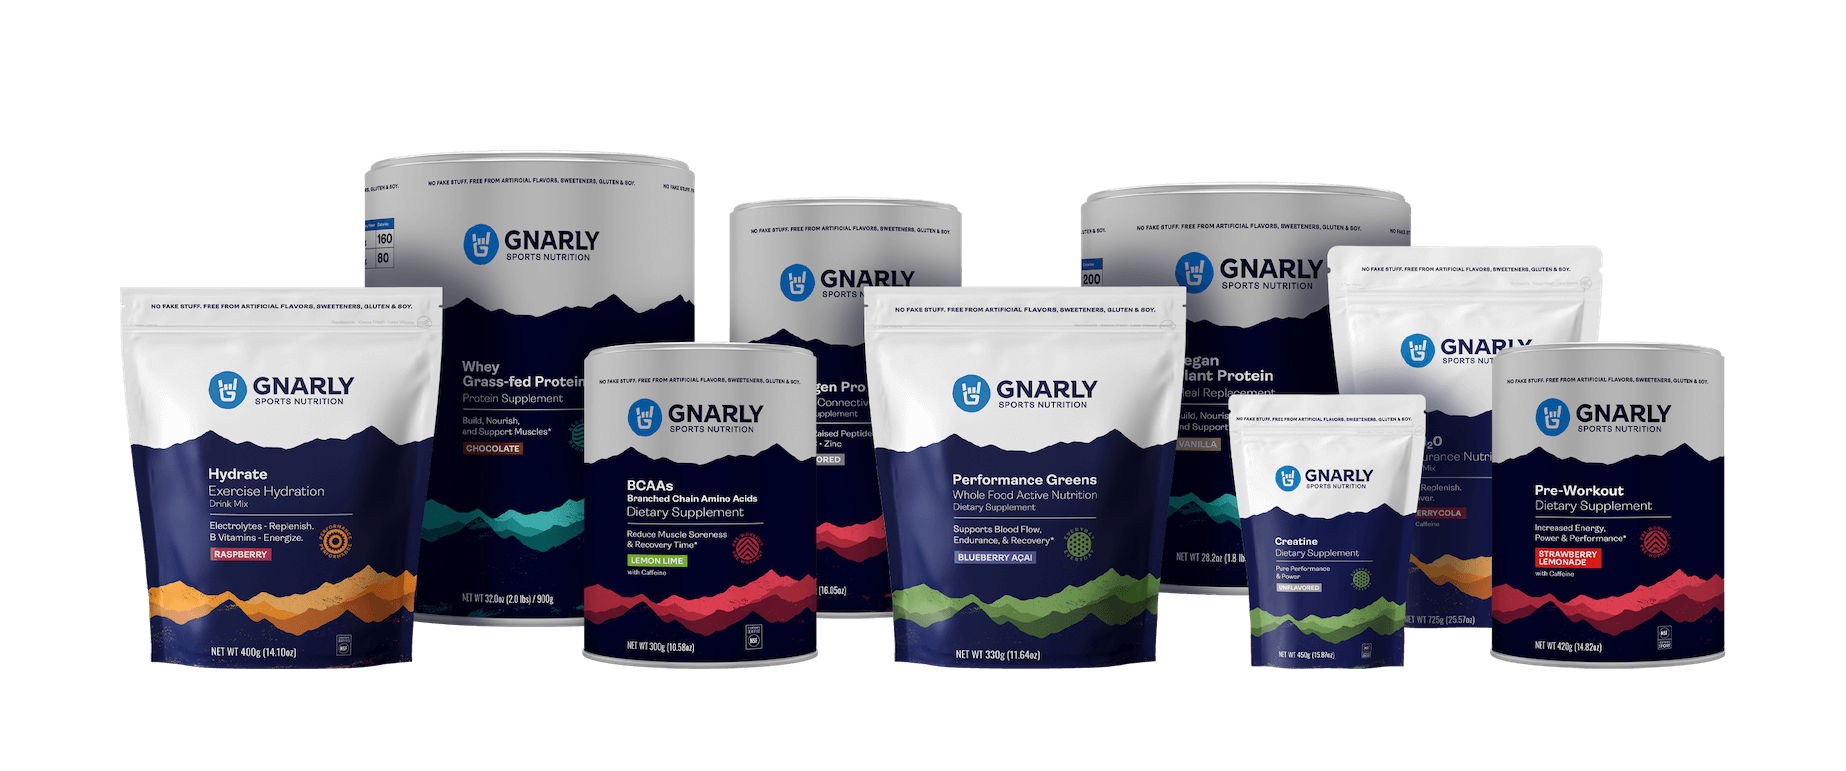 Gnarly Nutrition doubled customer LTV with subscriptions